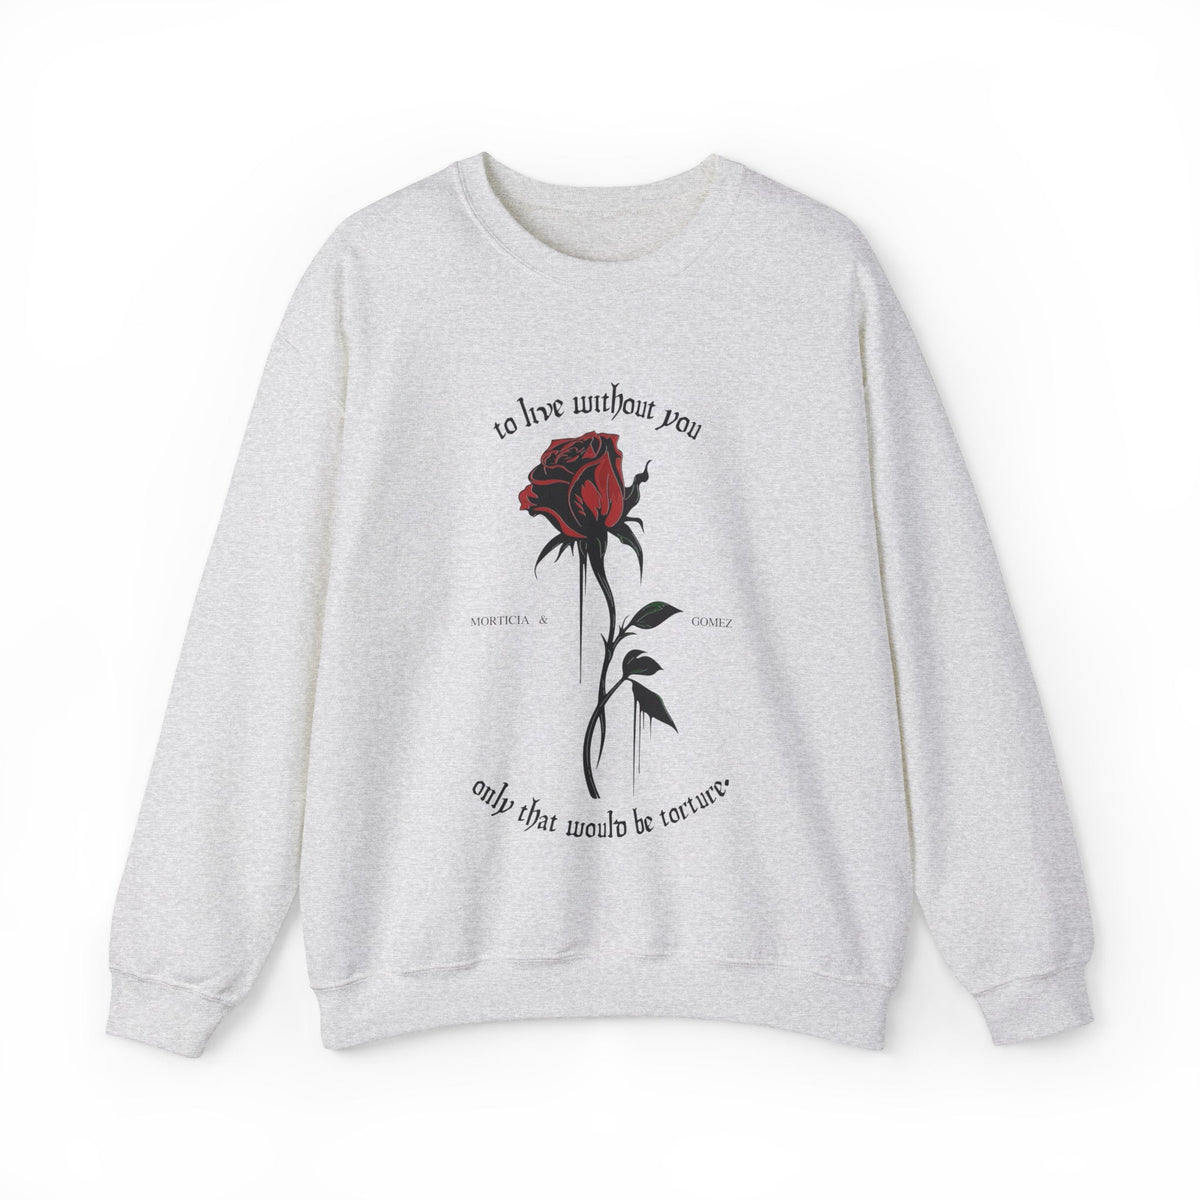 Morticia & Gomez 'Torture Without You' Gothic Rose Sweatshirt - Goth Cloth Co.Sweatshirt96432784082578667307